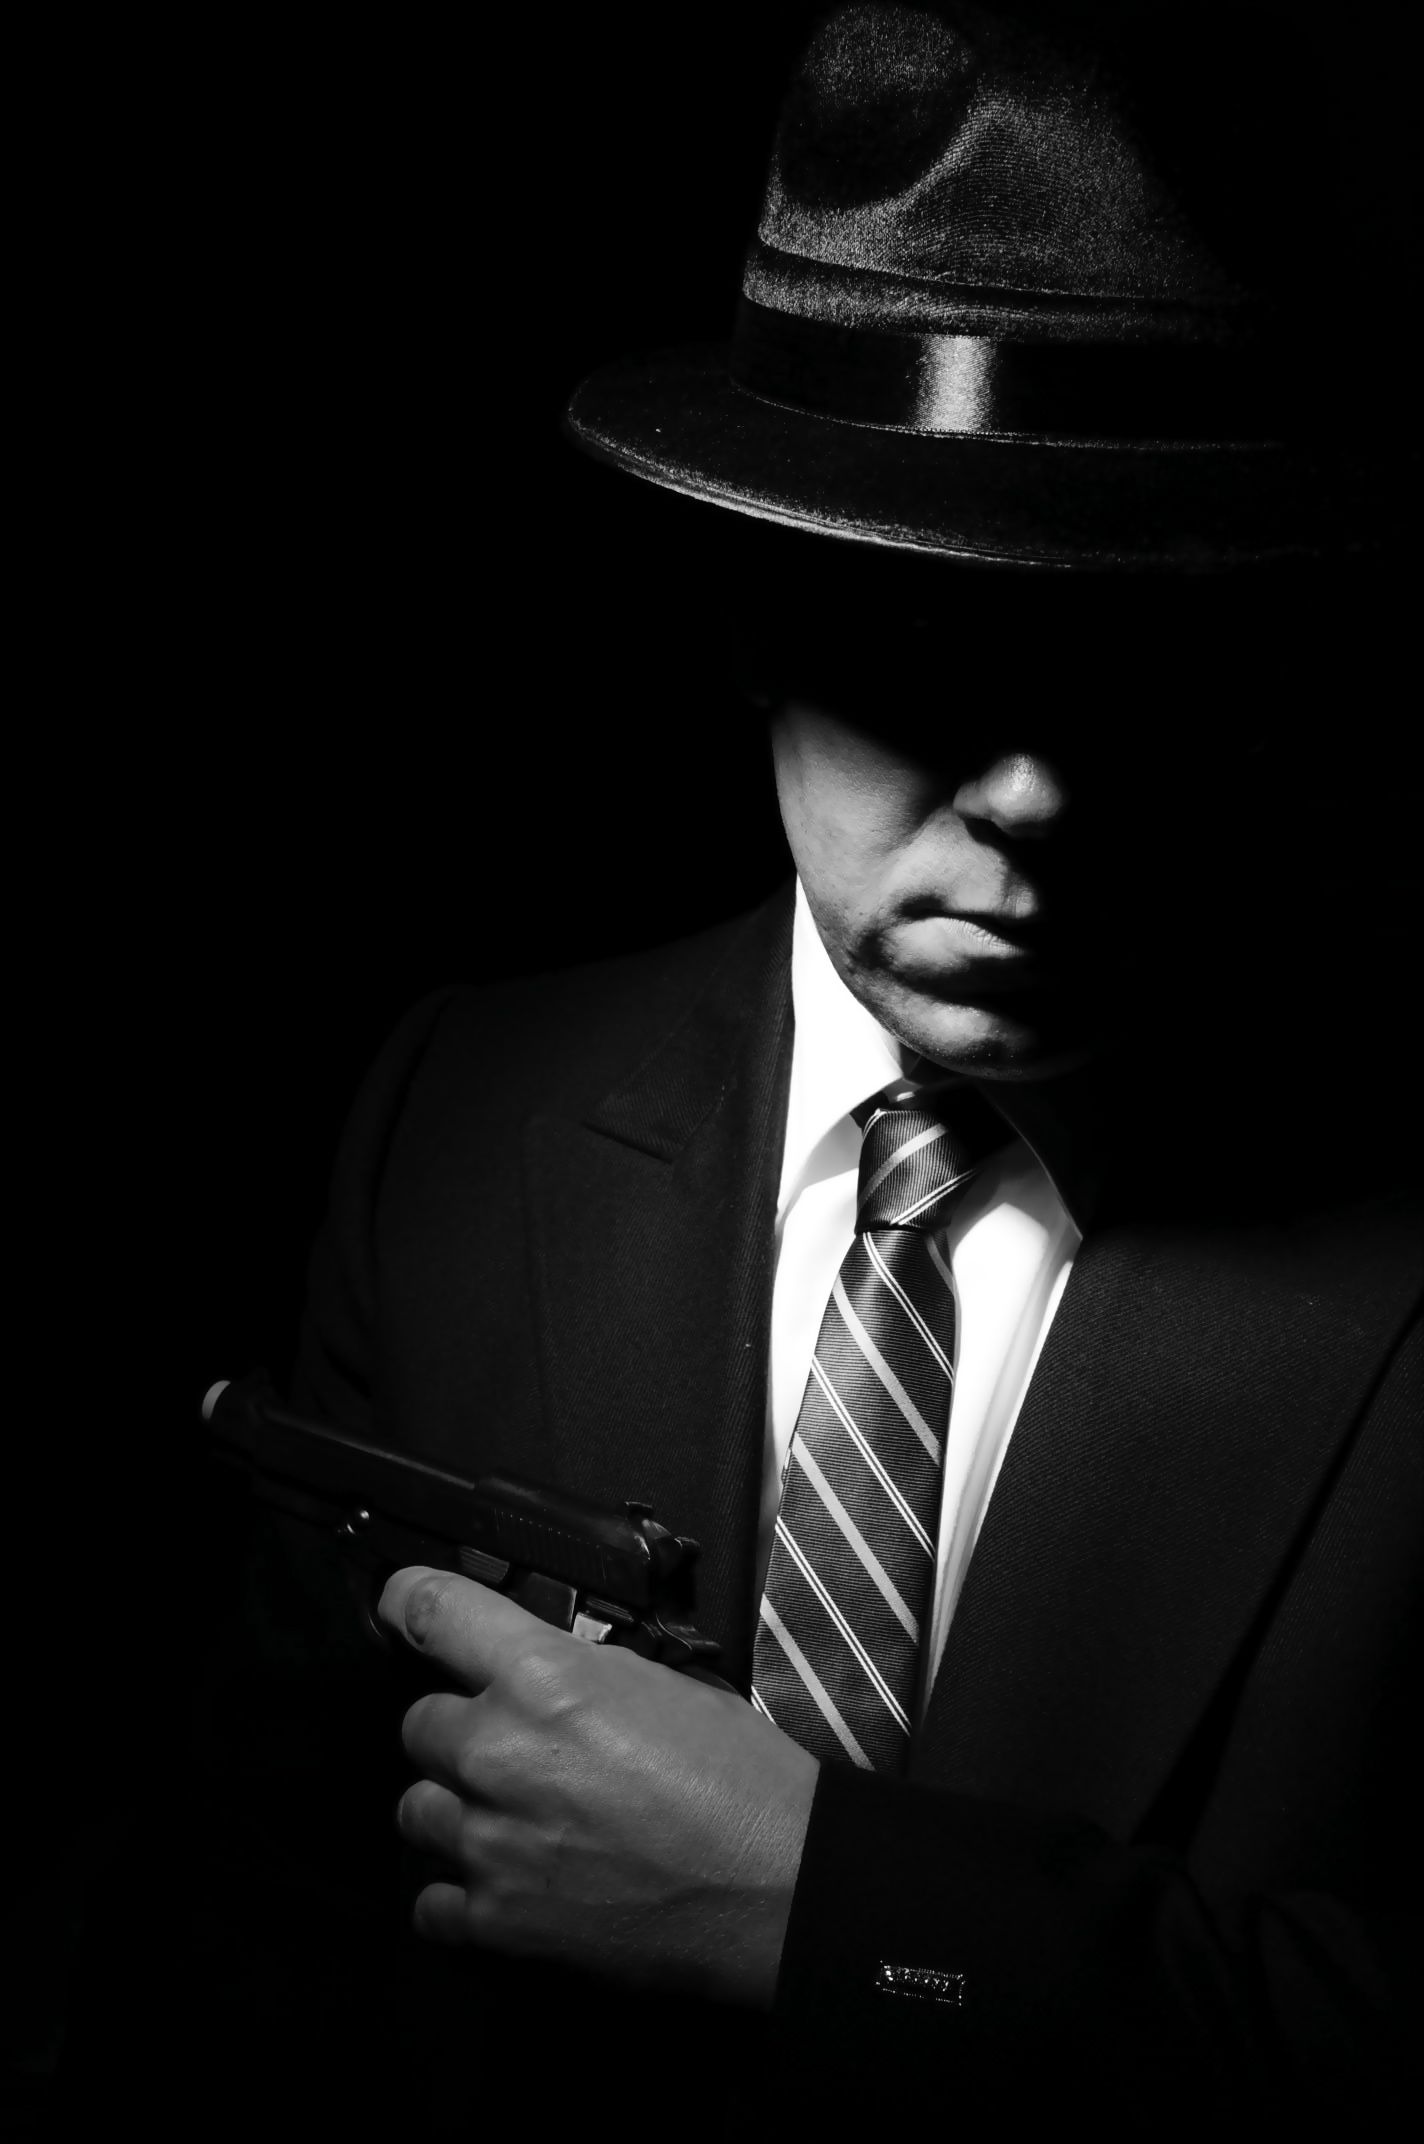 a man in a suit and tie holds a gun